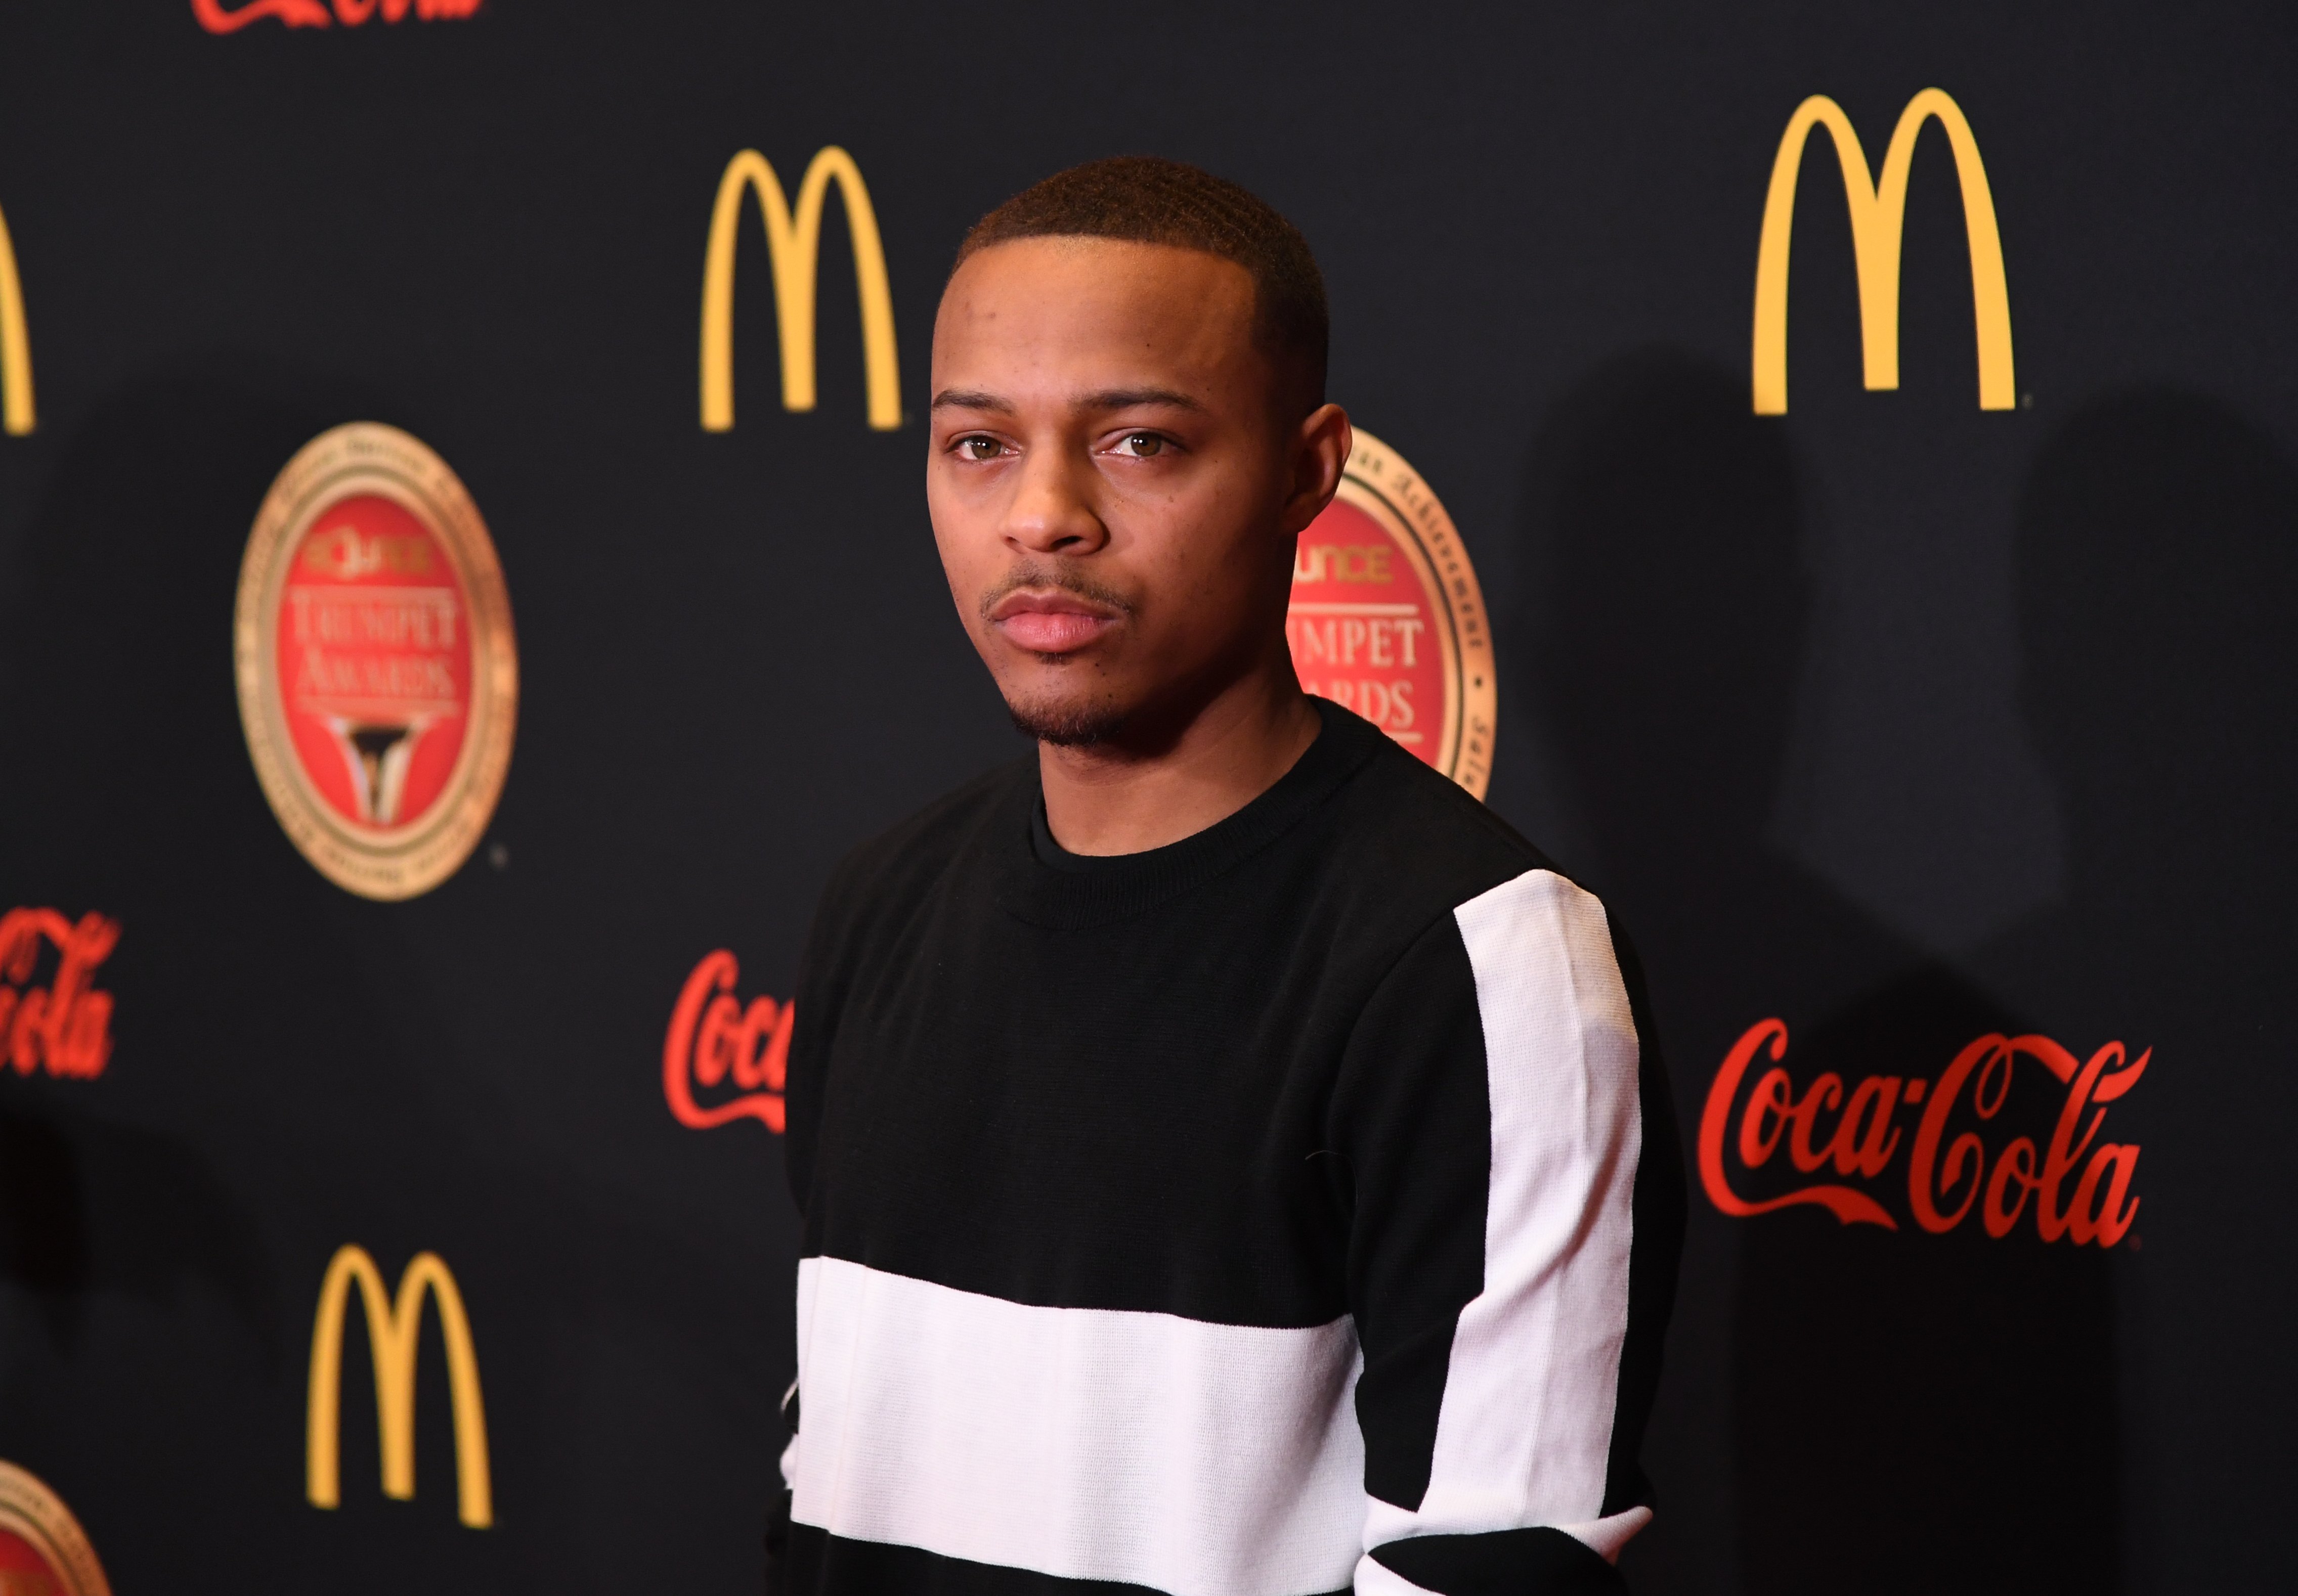 Bow Wow at the 26th Annual Trumpet Awards on January 20, 2018 in Atlanta, Georgia. | Source: Getty Images